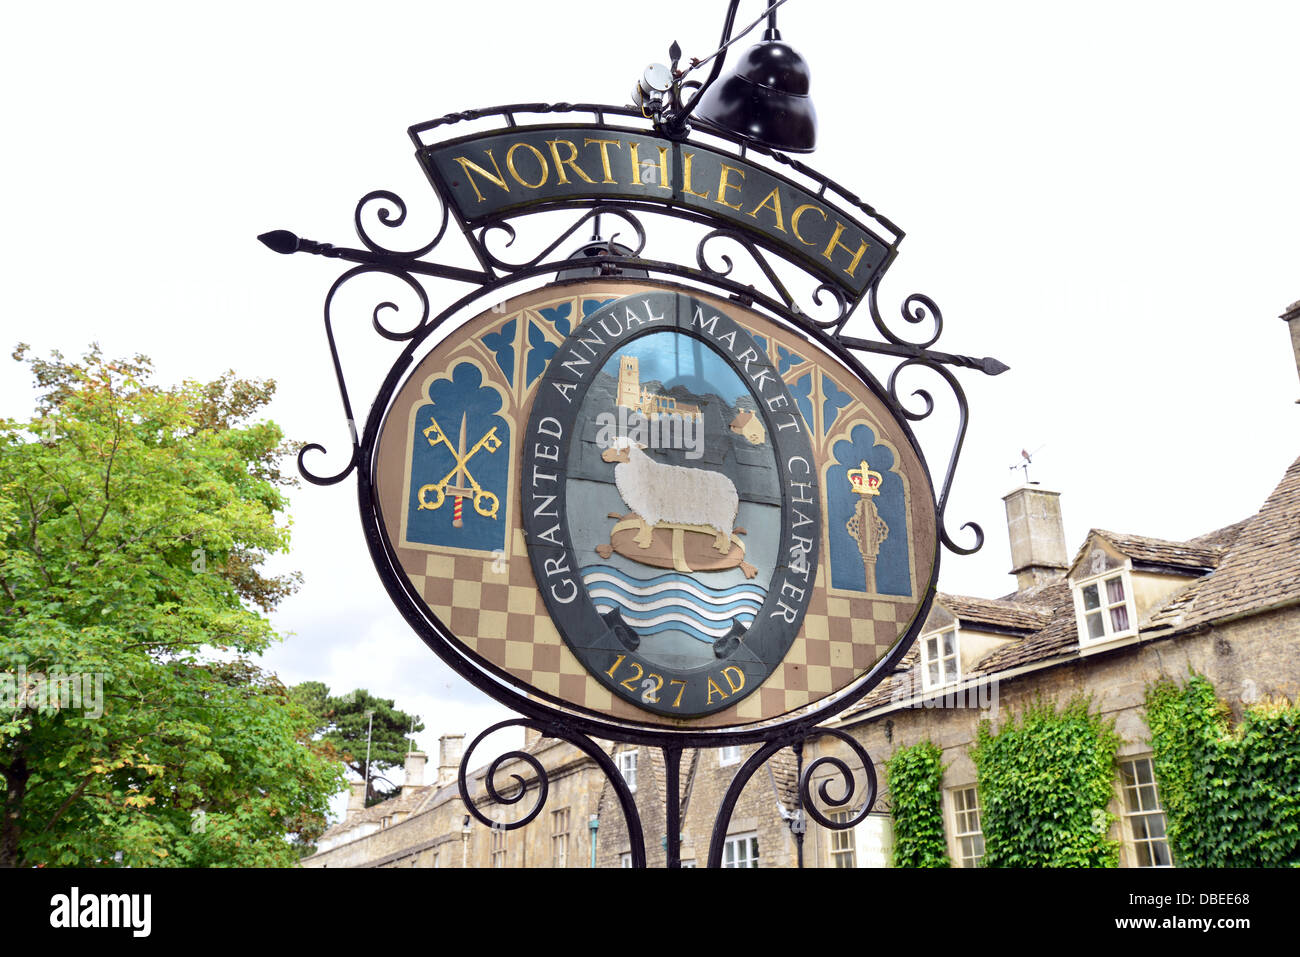 Town sign, Northleach, Gloucestershire, England, United Kingdom Stock Photo